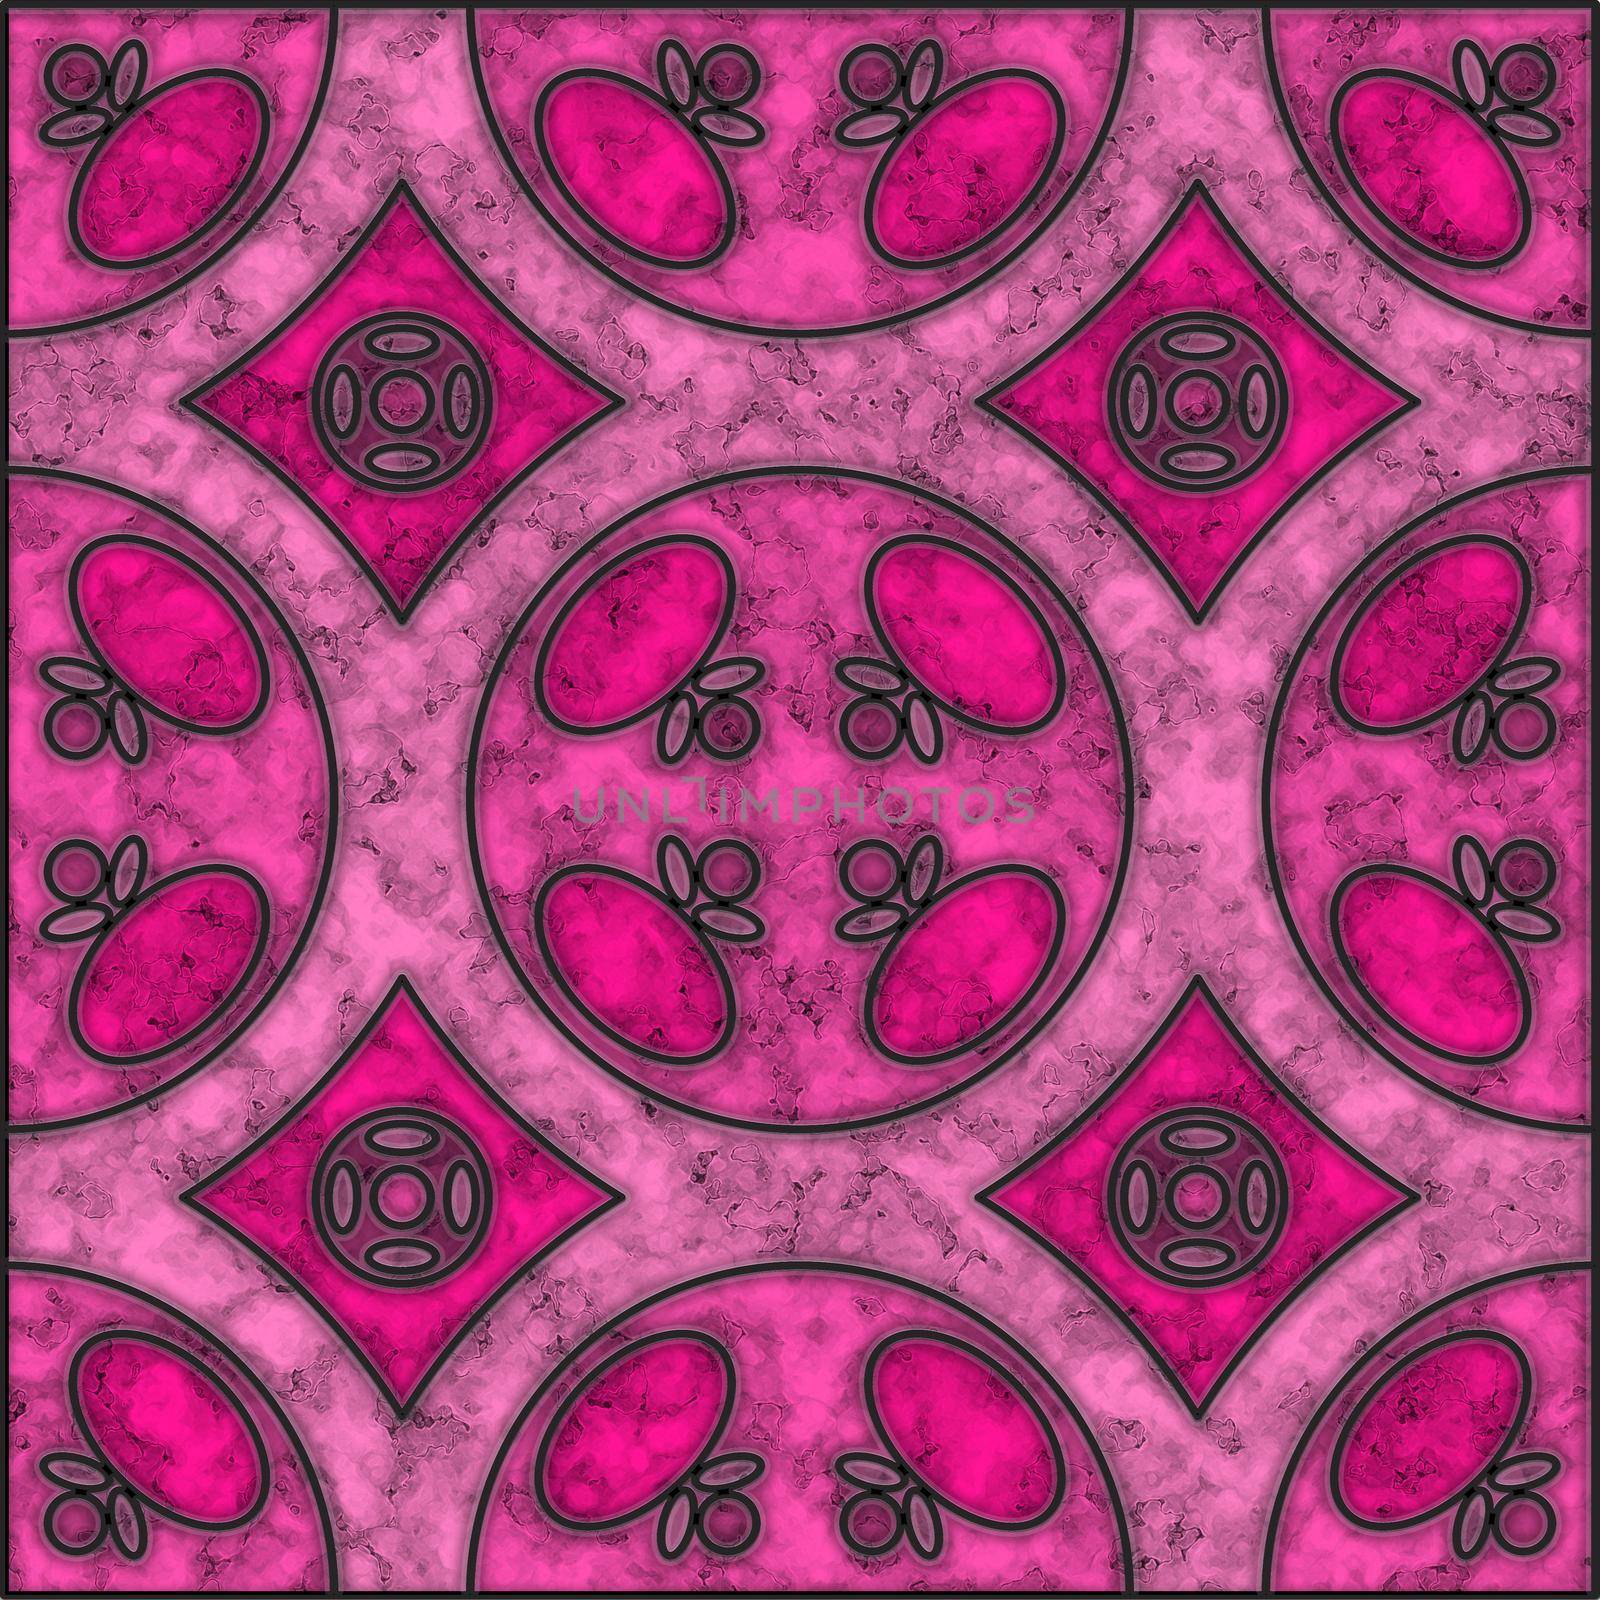 Violet, pink and magenta marble tile with abstract geometric pattern